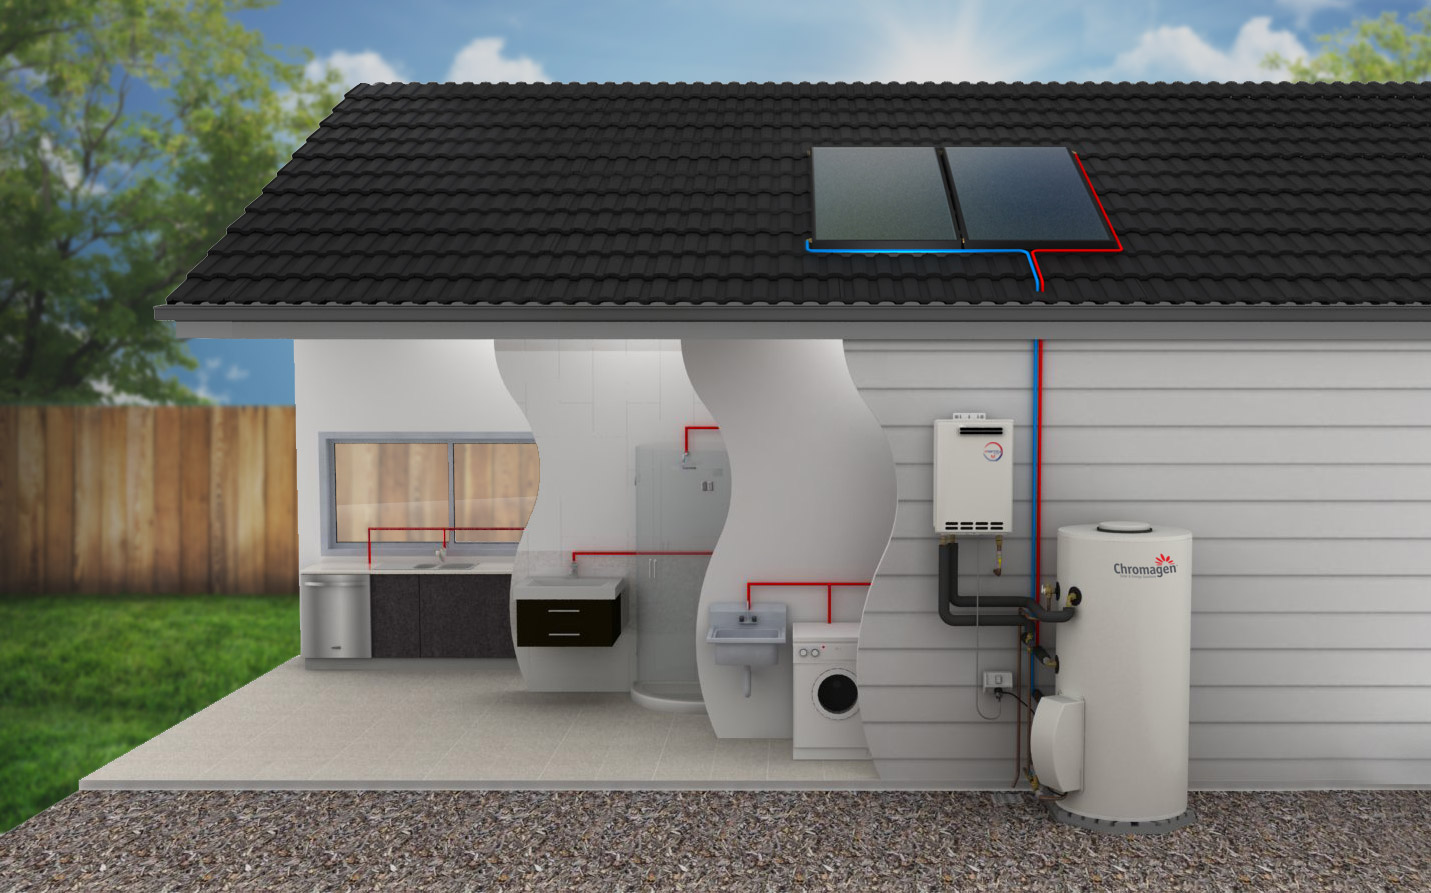 How the SplitLine solar hot water system works